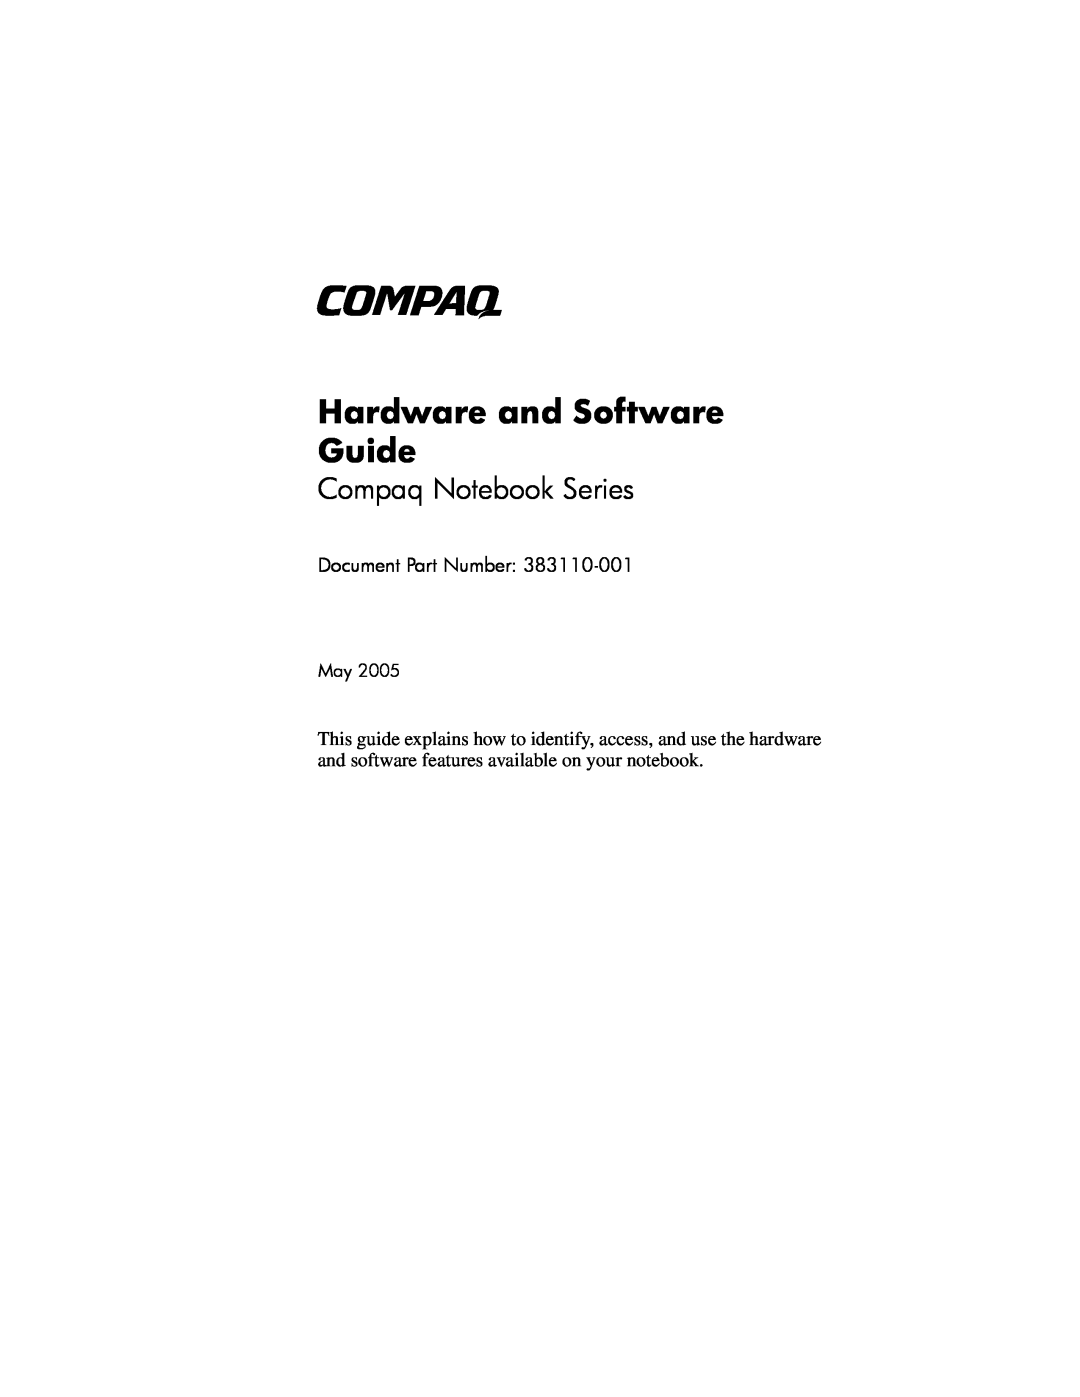 Compaq Presario M2000 manual Hardware and Software Guide, Compaq Notebook Series, Document Part Number 